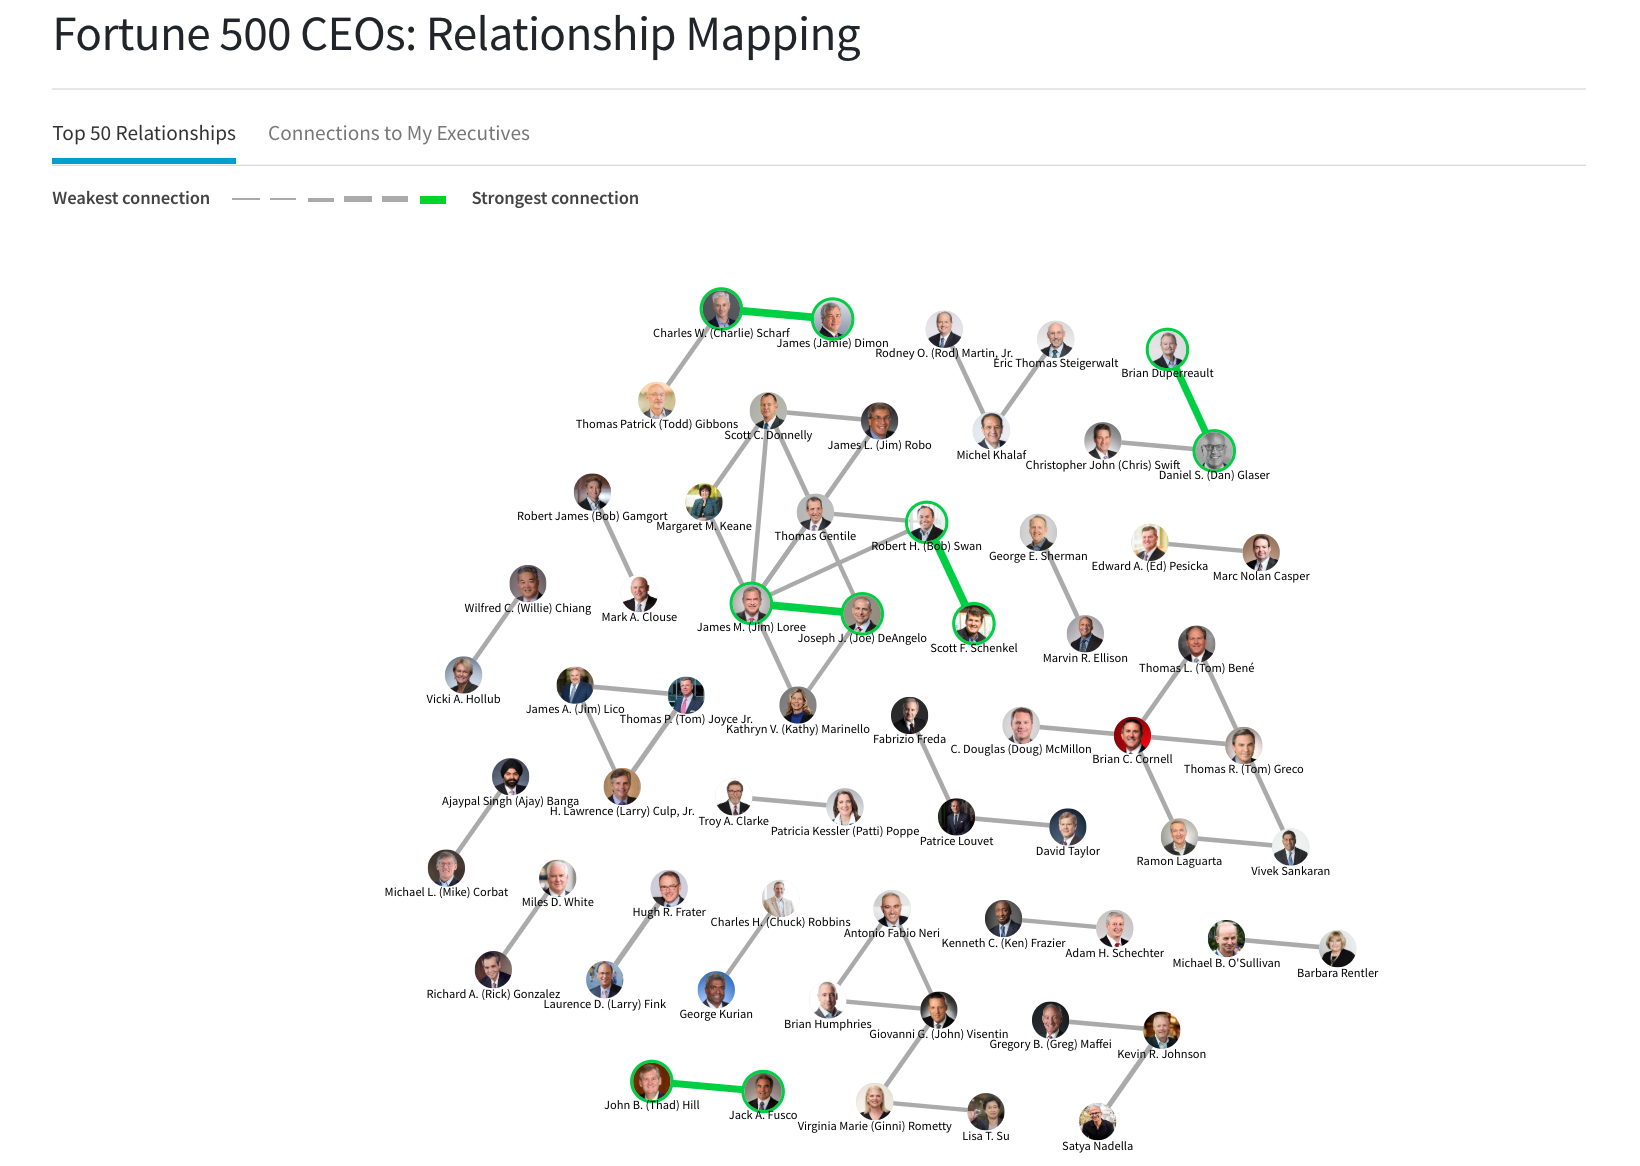 Relationship mapping